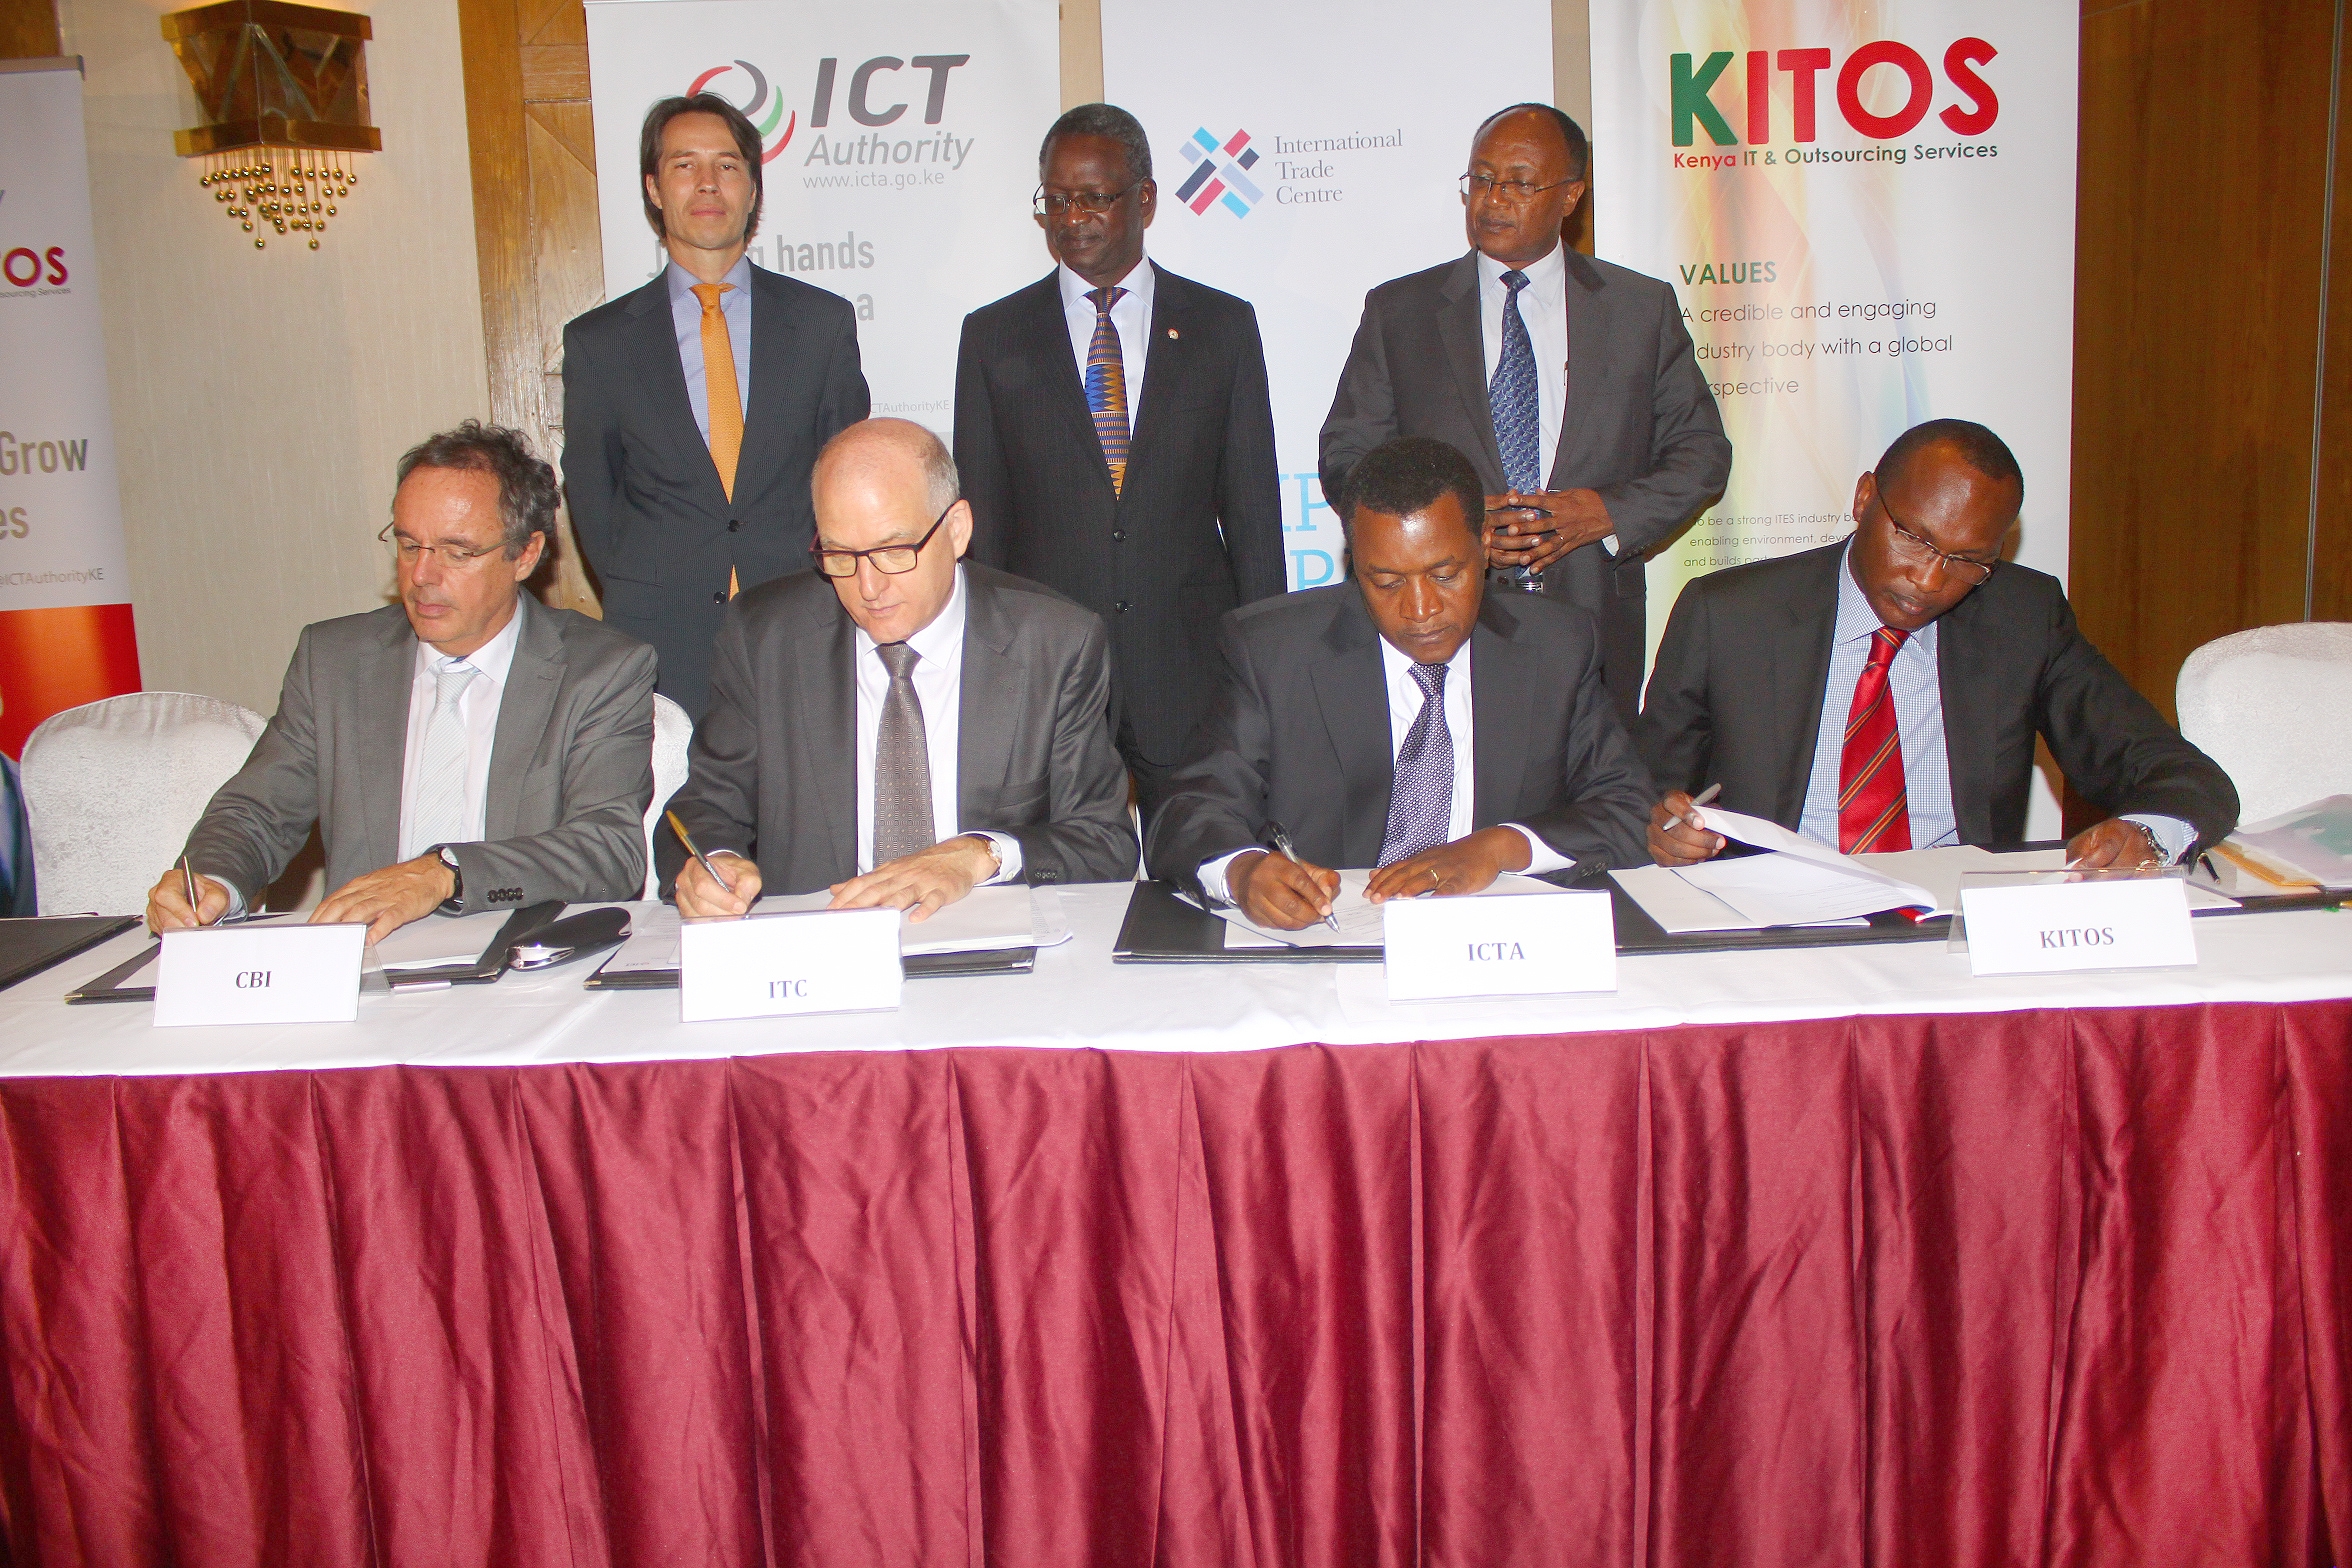 ICT Authority, Governemnt of Netherlands in US$ 1.2 million funding project for the ICT sector